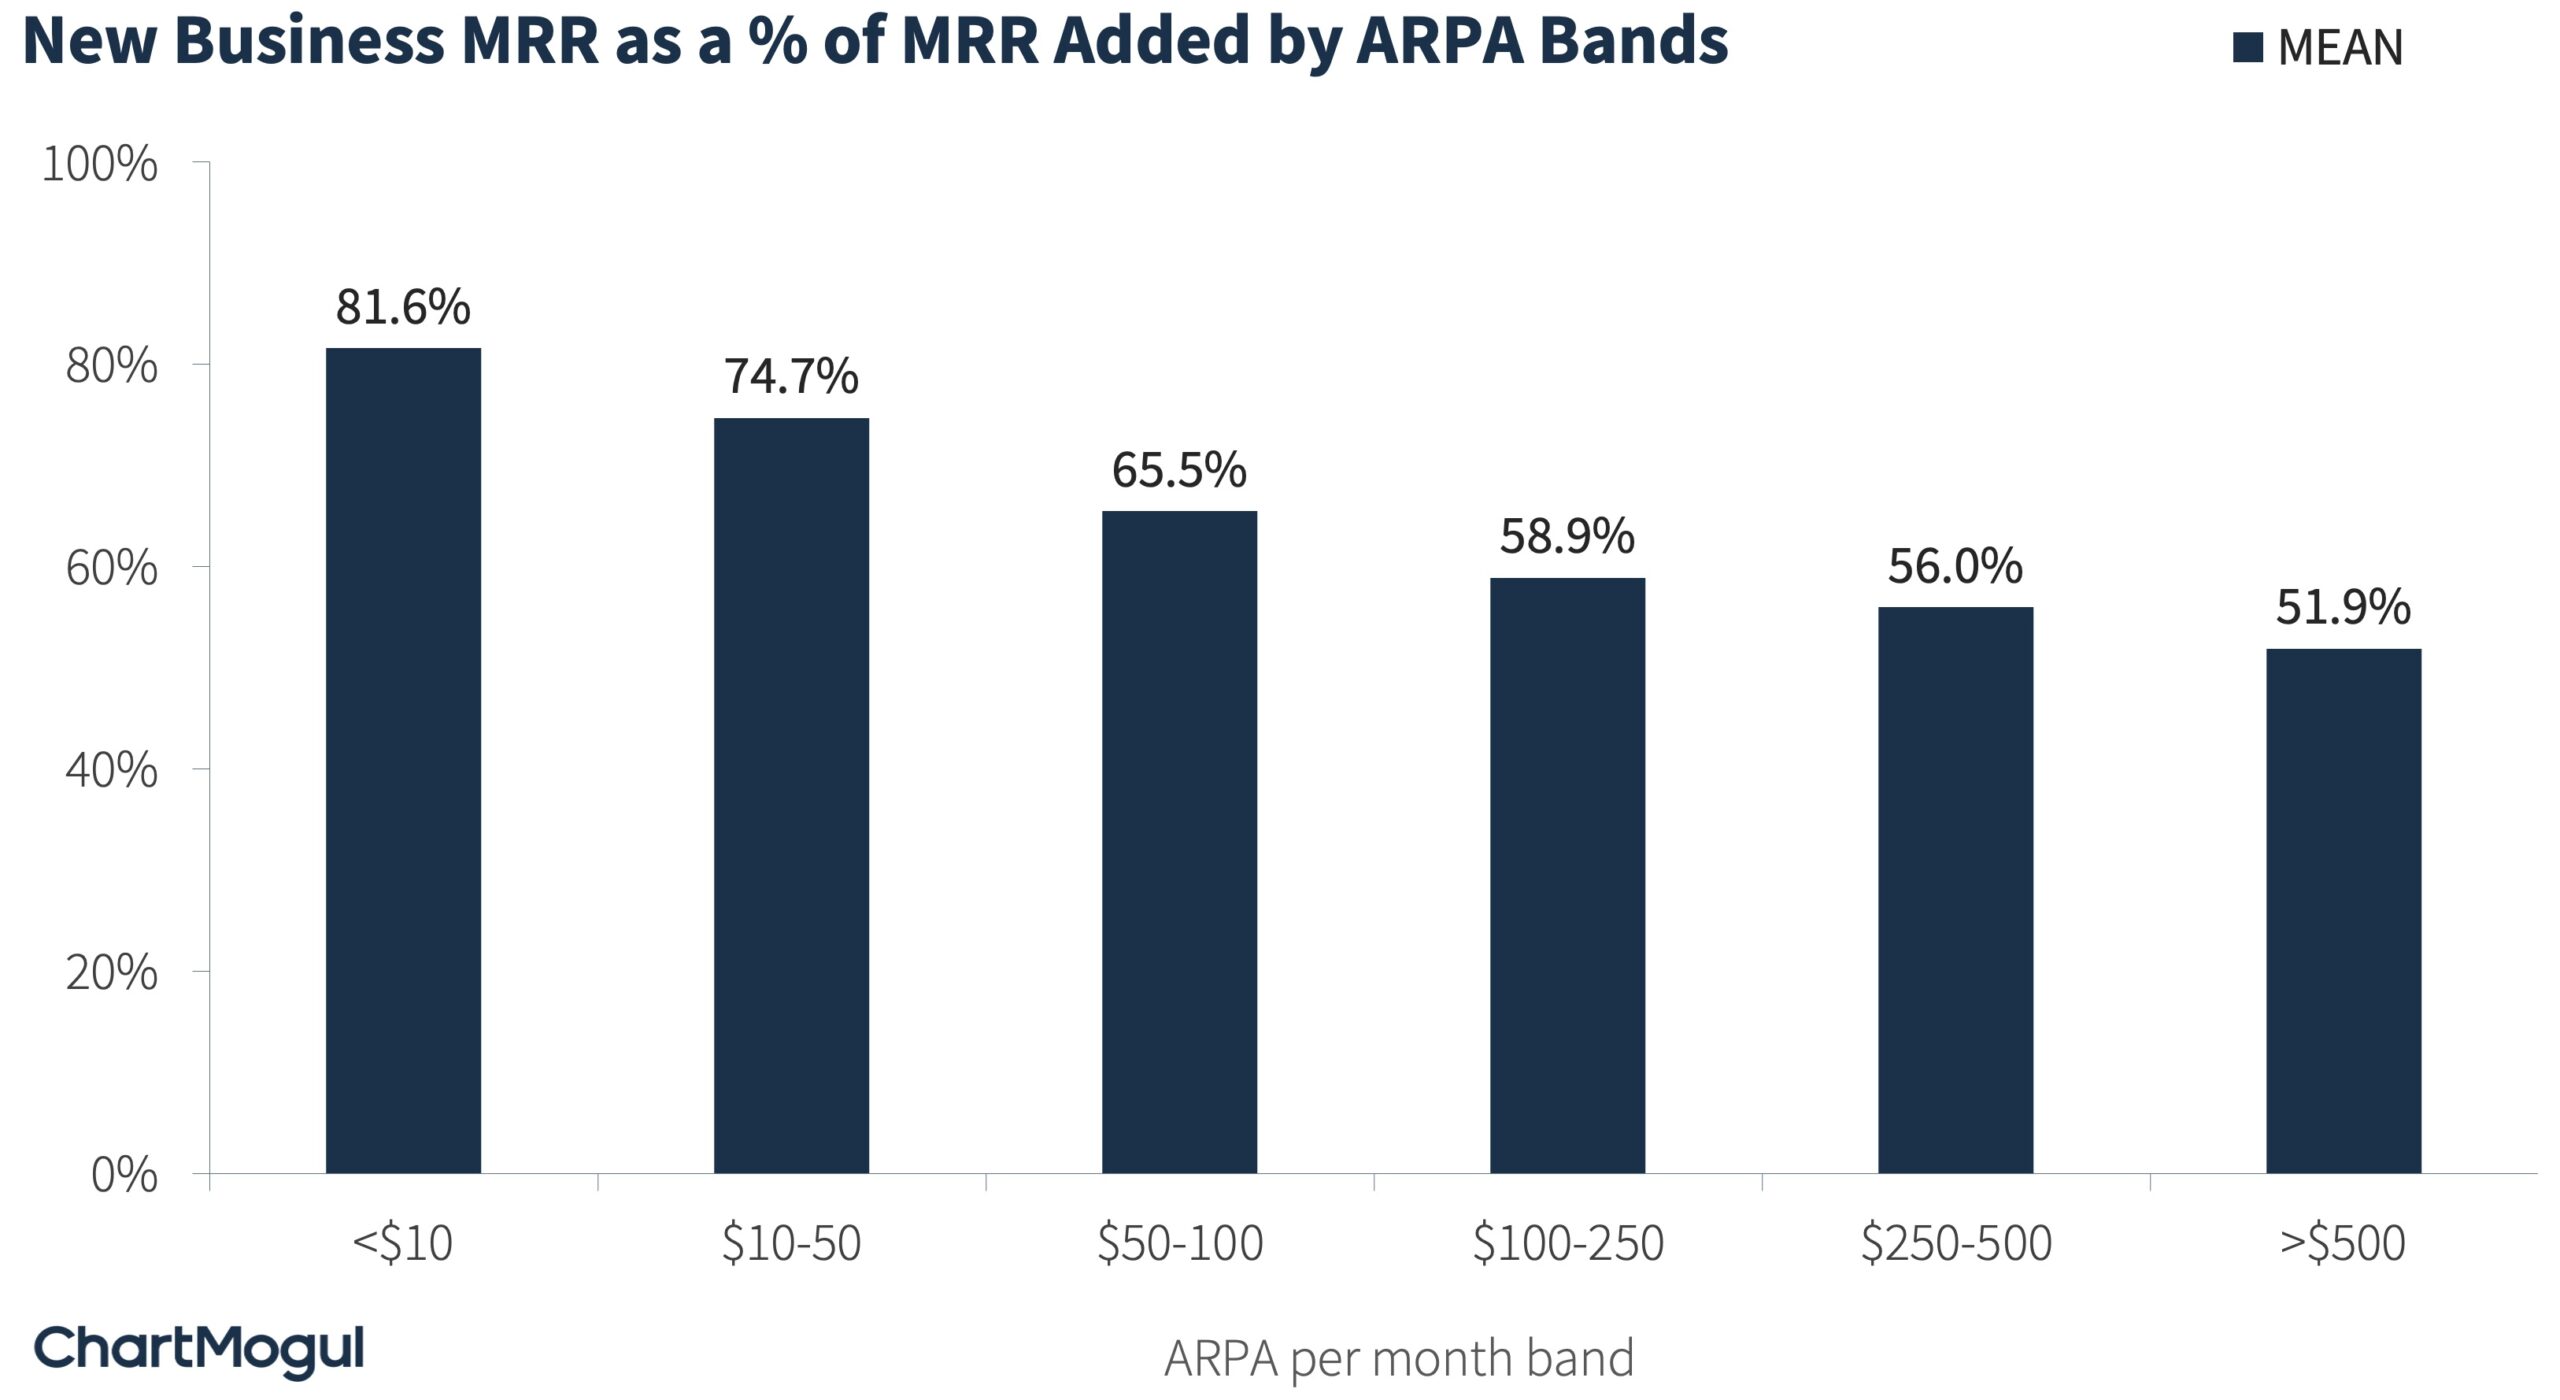 New Business MRR as a % of MRR Added by ARPA Bands